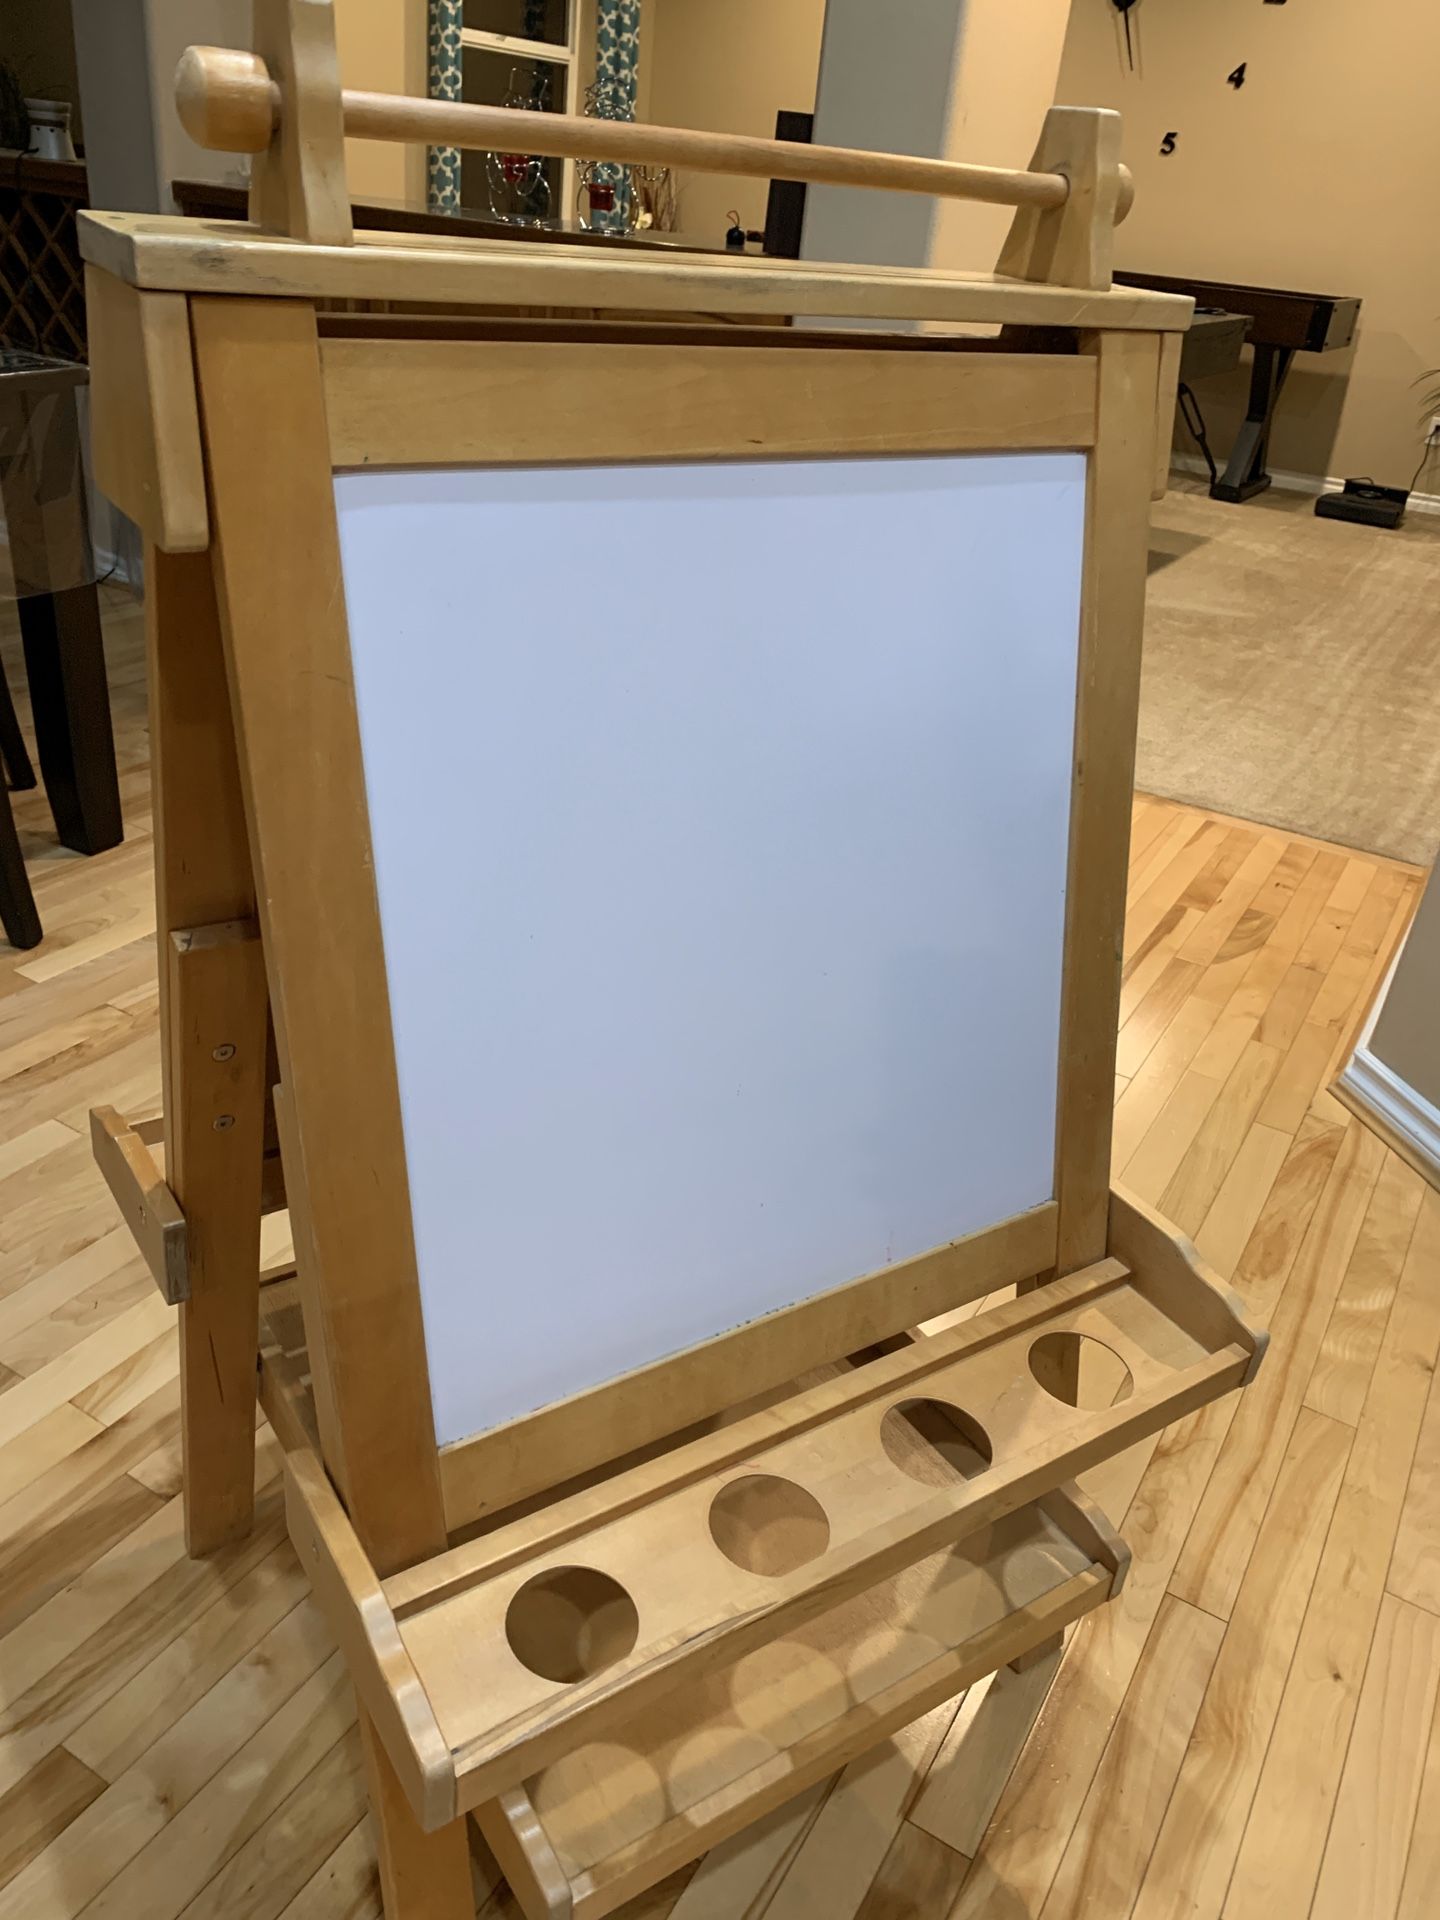 Easel in great shape. Solid!